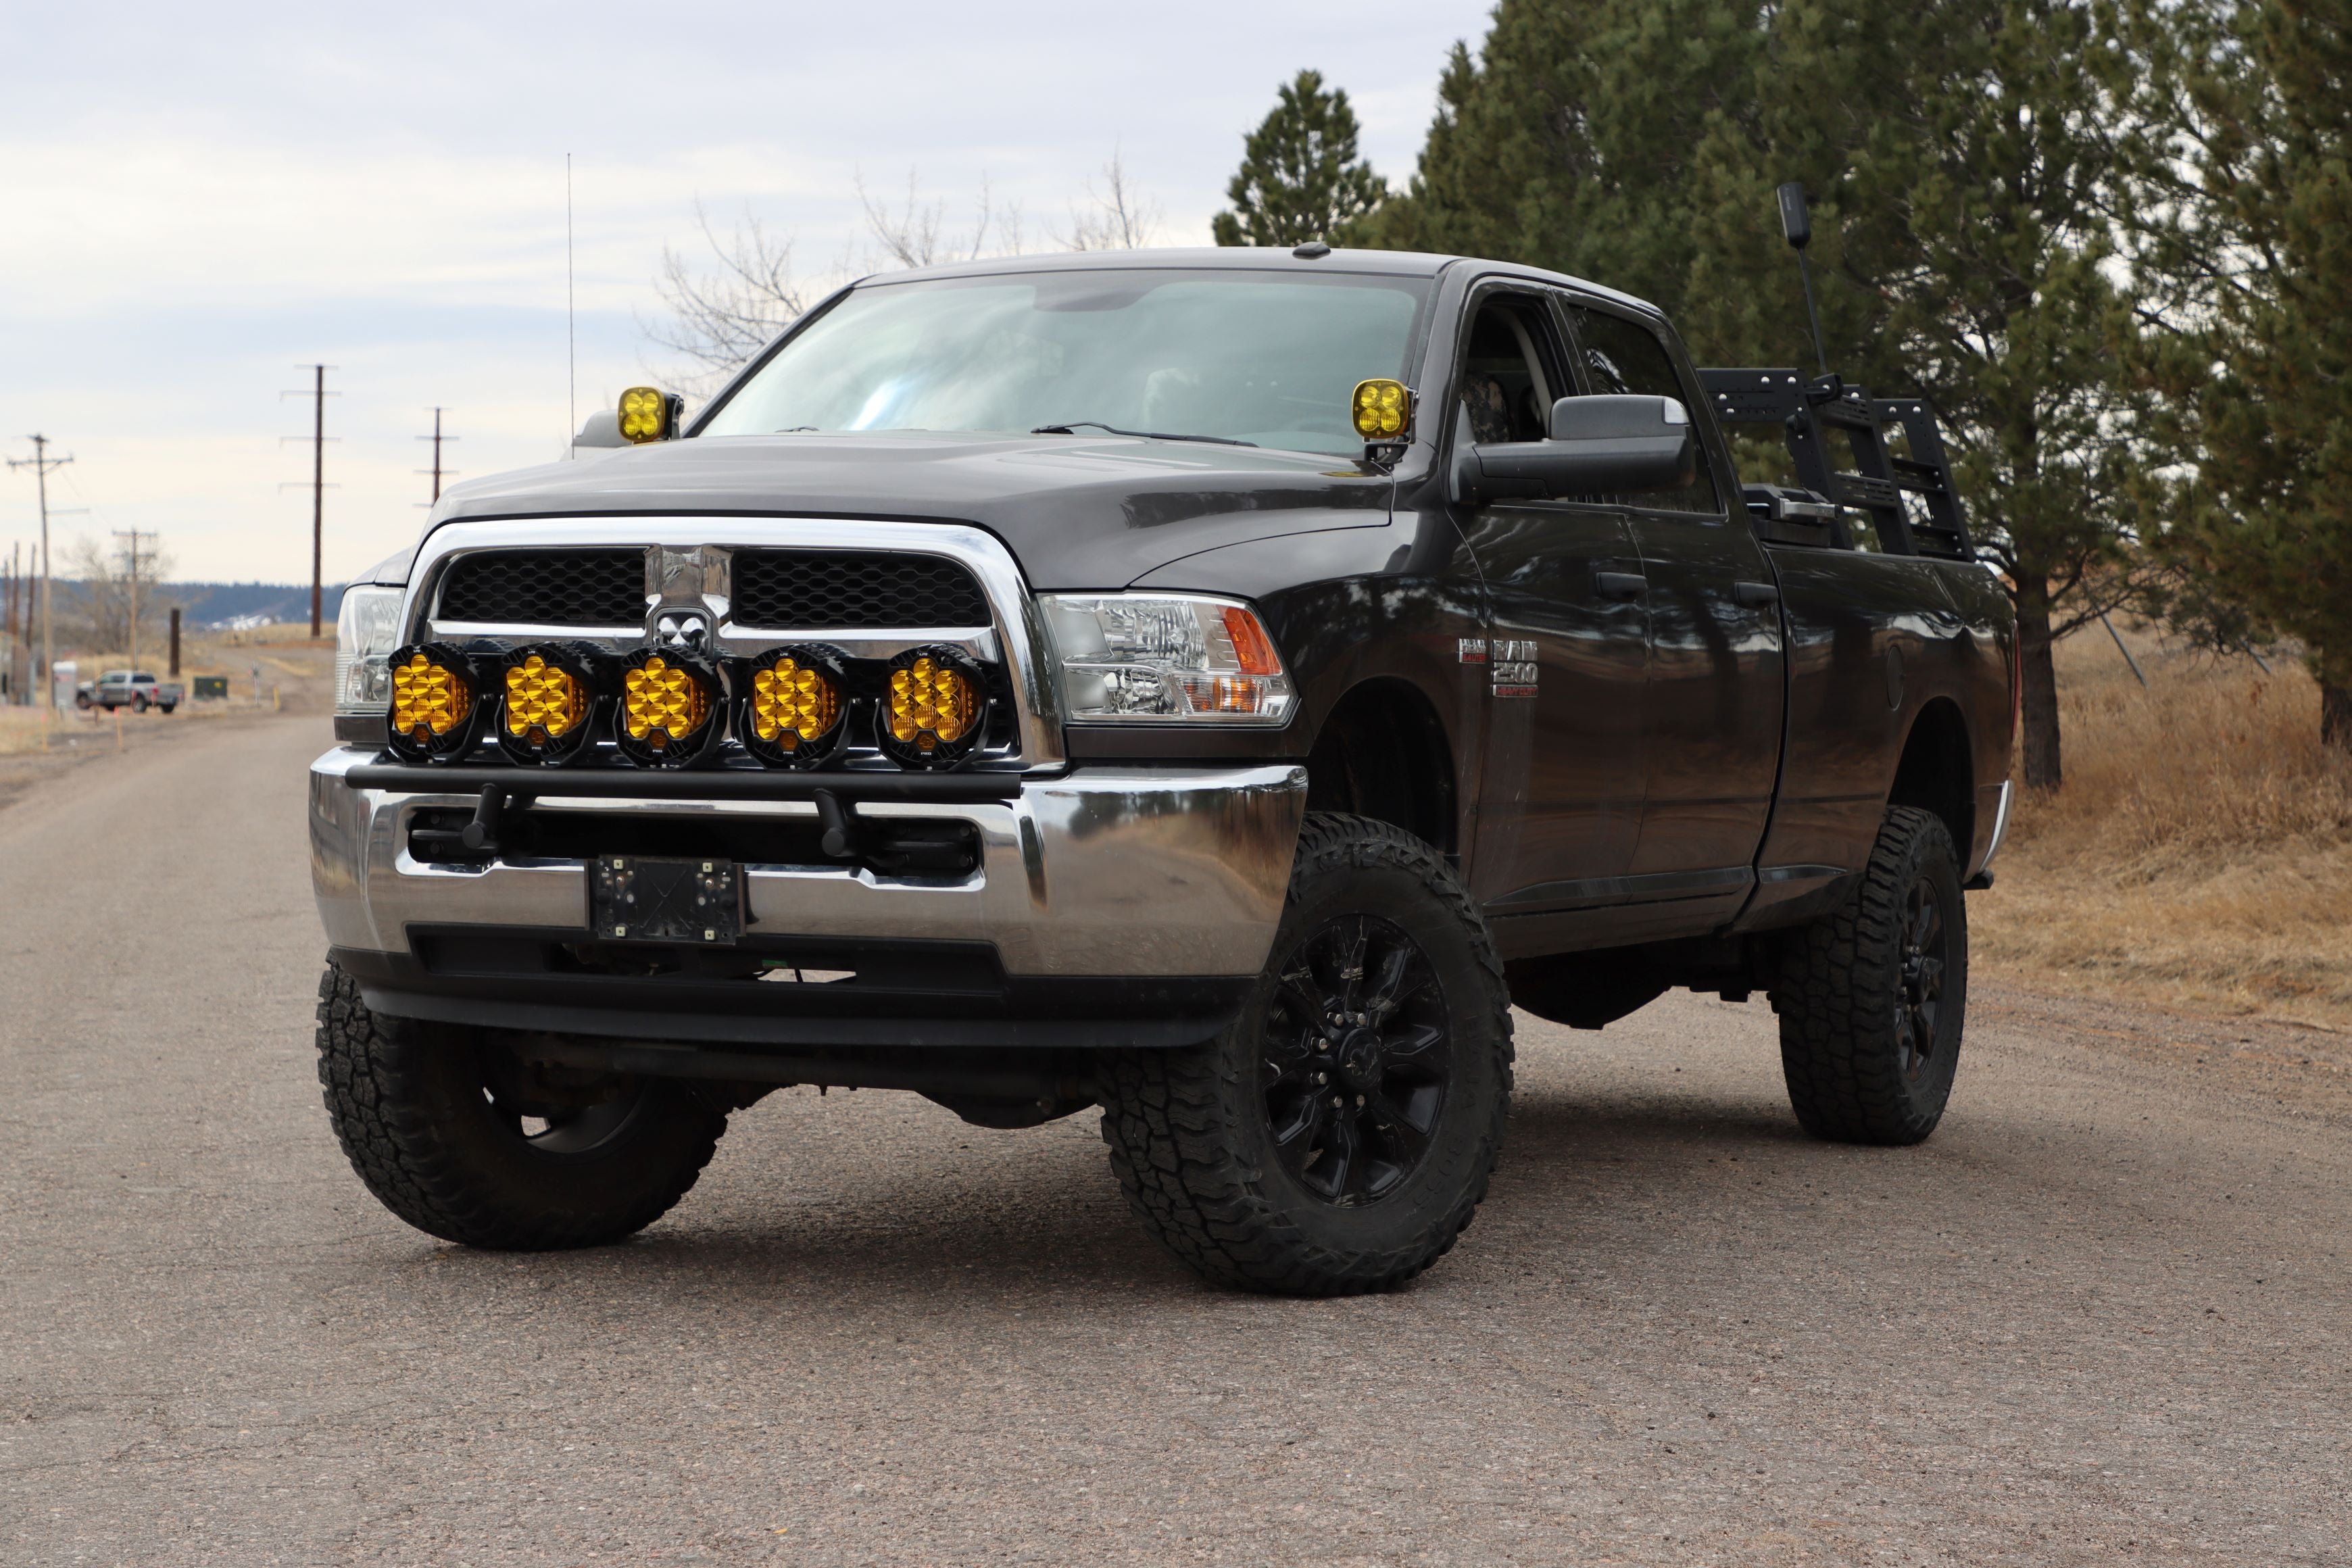 4G RAM 2500/3500 Truck Lighting and Electrical Upgrades